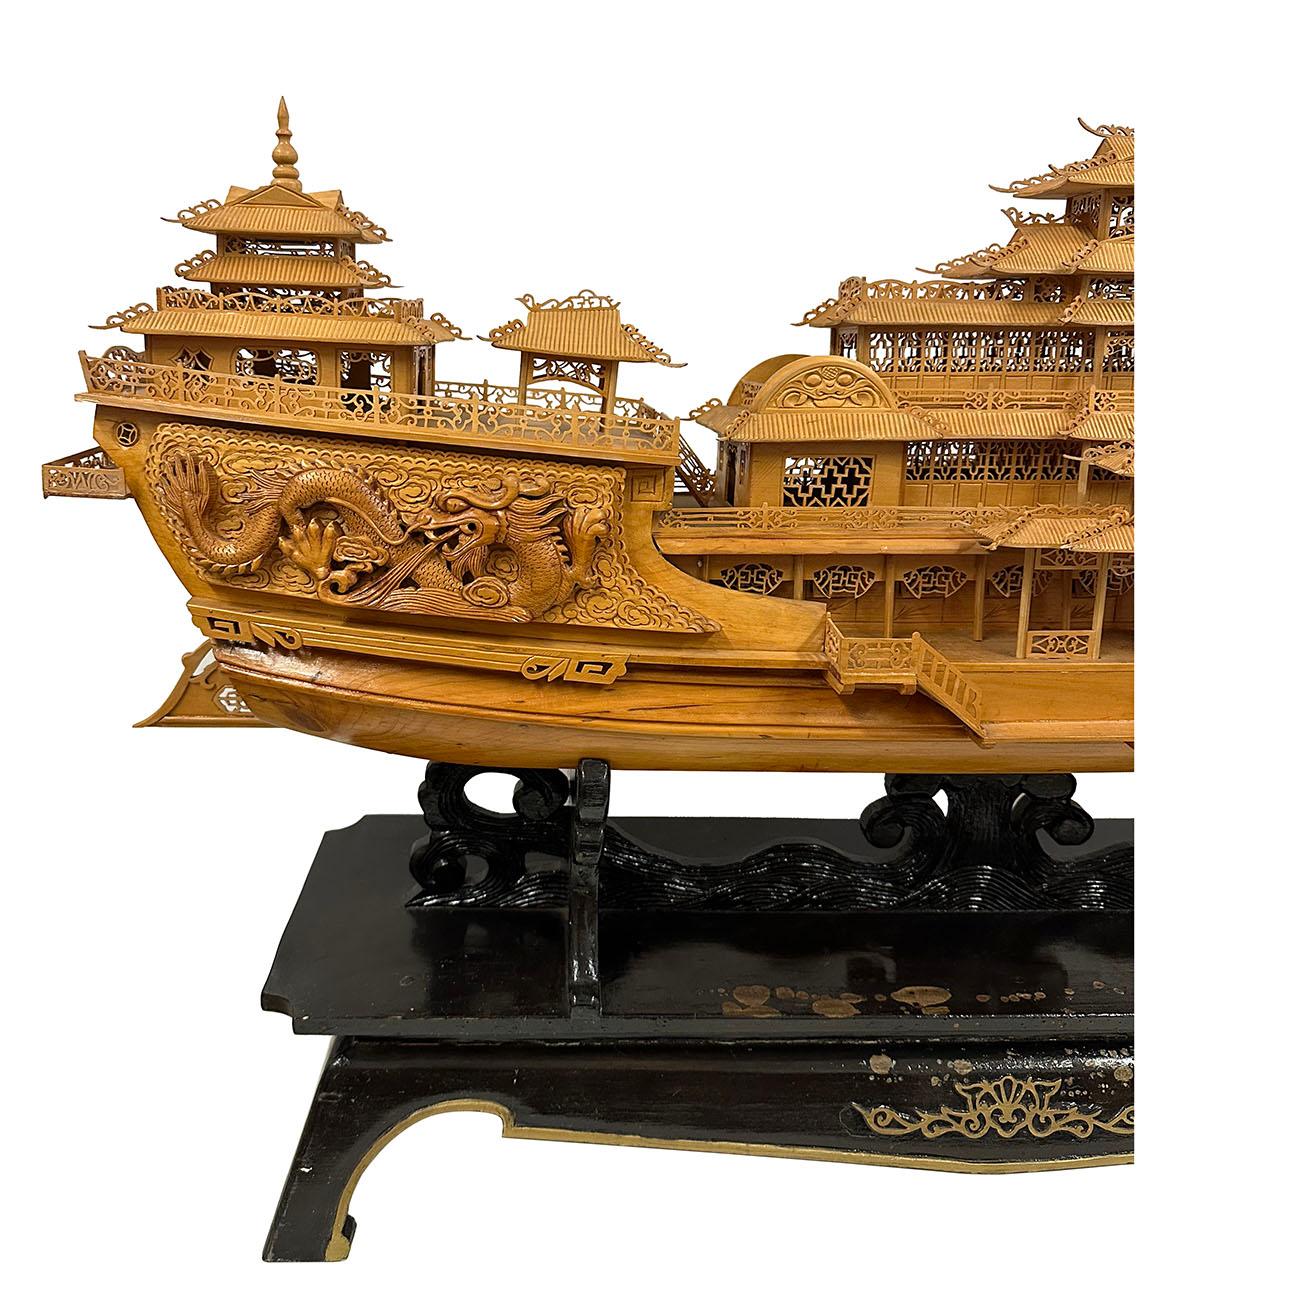 Hand-Carved Mid-20th Century, Chinese Large Wooden Carved Elaborate Imperial Dragon Ship For Sale